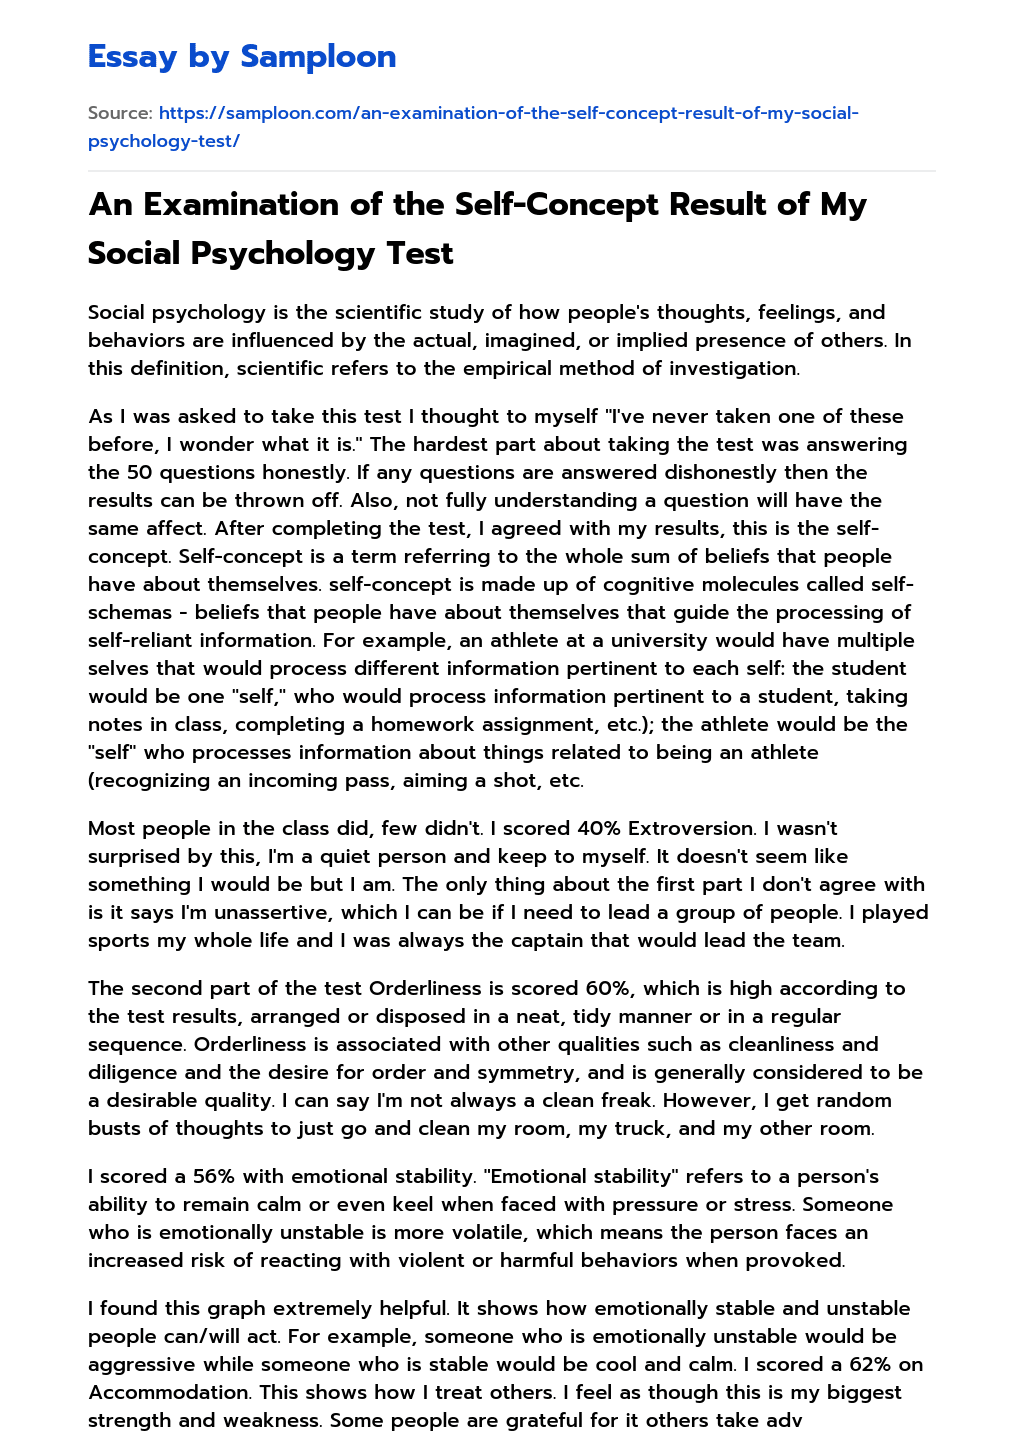 An Examination of the Self-Concept Result of My Social Psychology Test essay